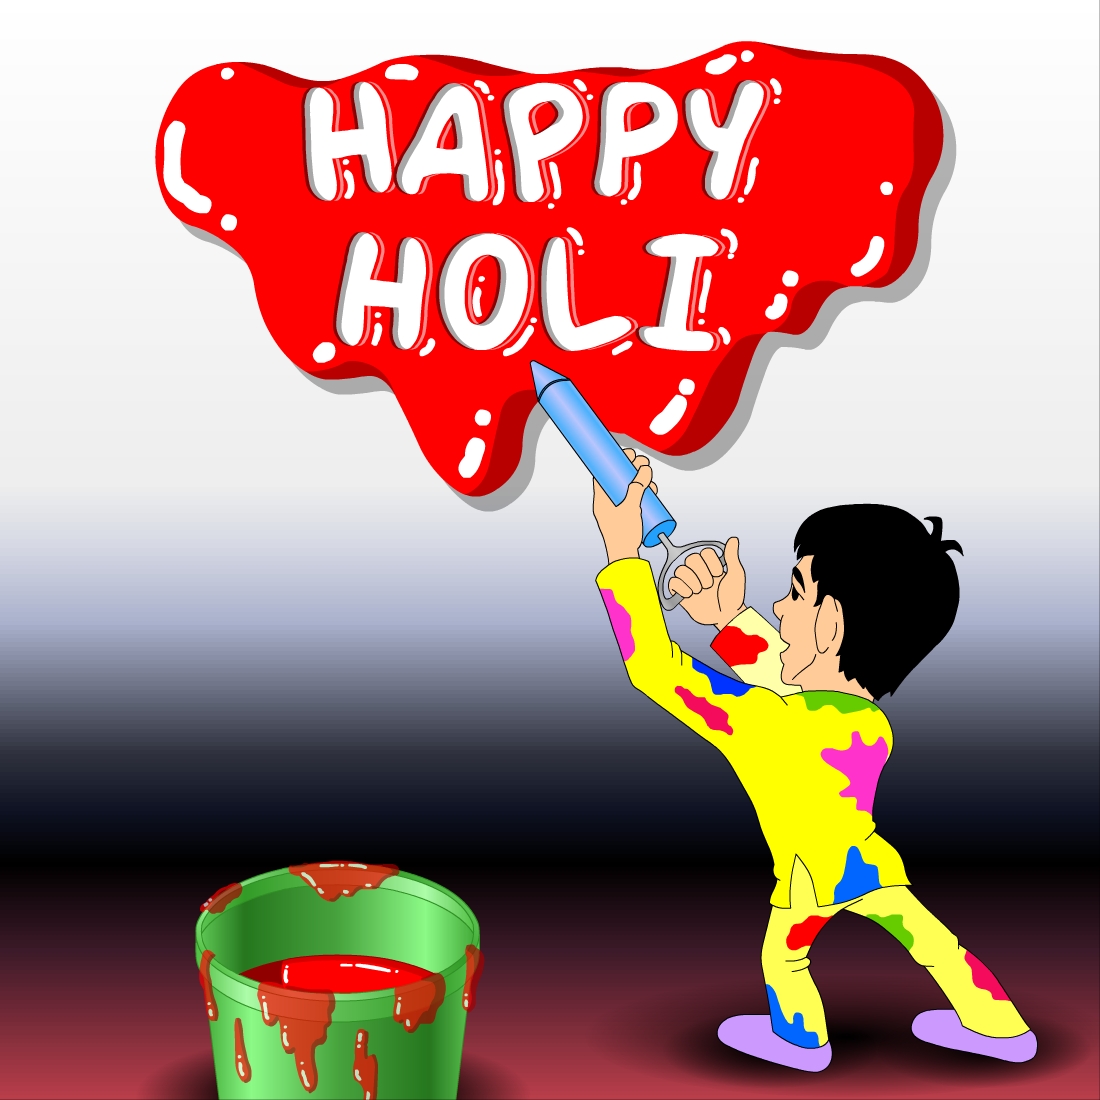 Cartoon of a boy holding a paintbrush with the words happy holi written.